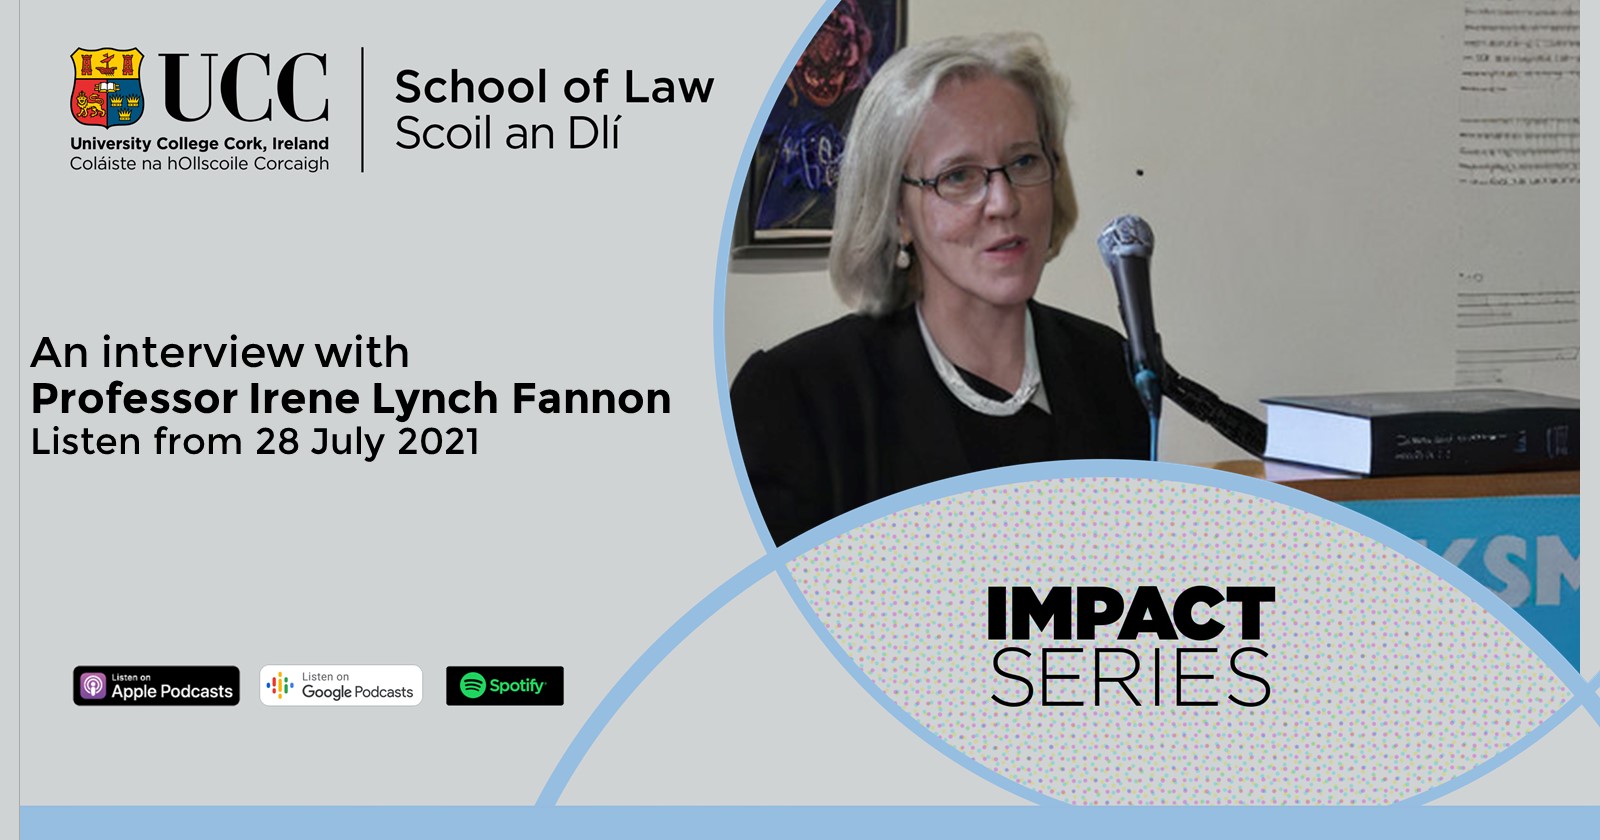 Staff impact in the spotlight as UCC School of Law launches new podcast series